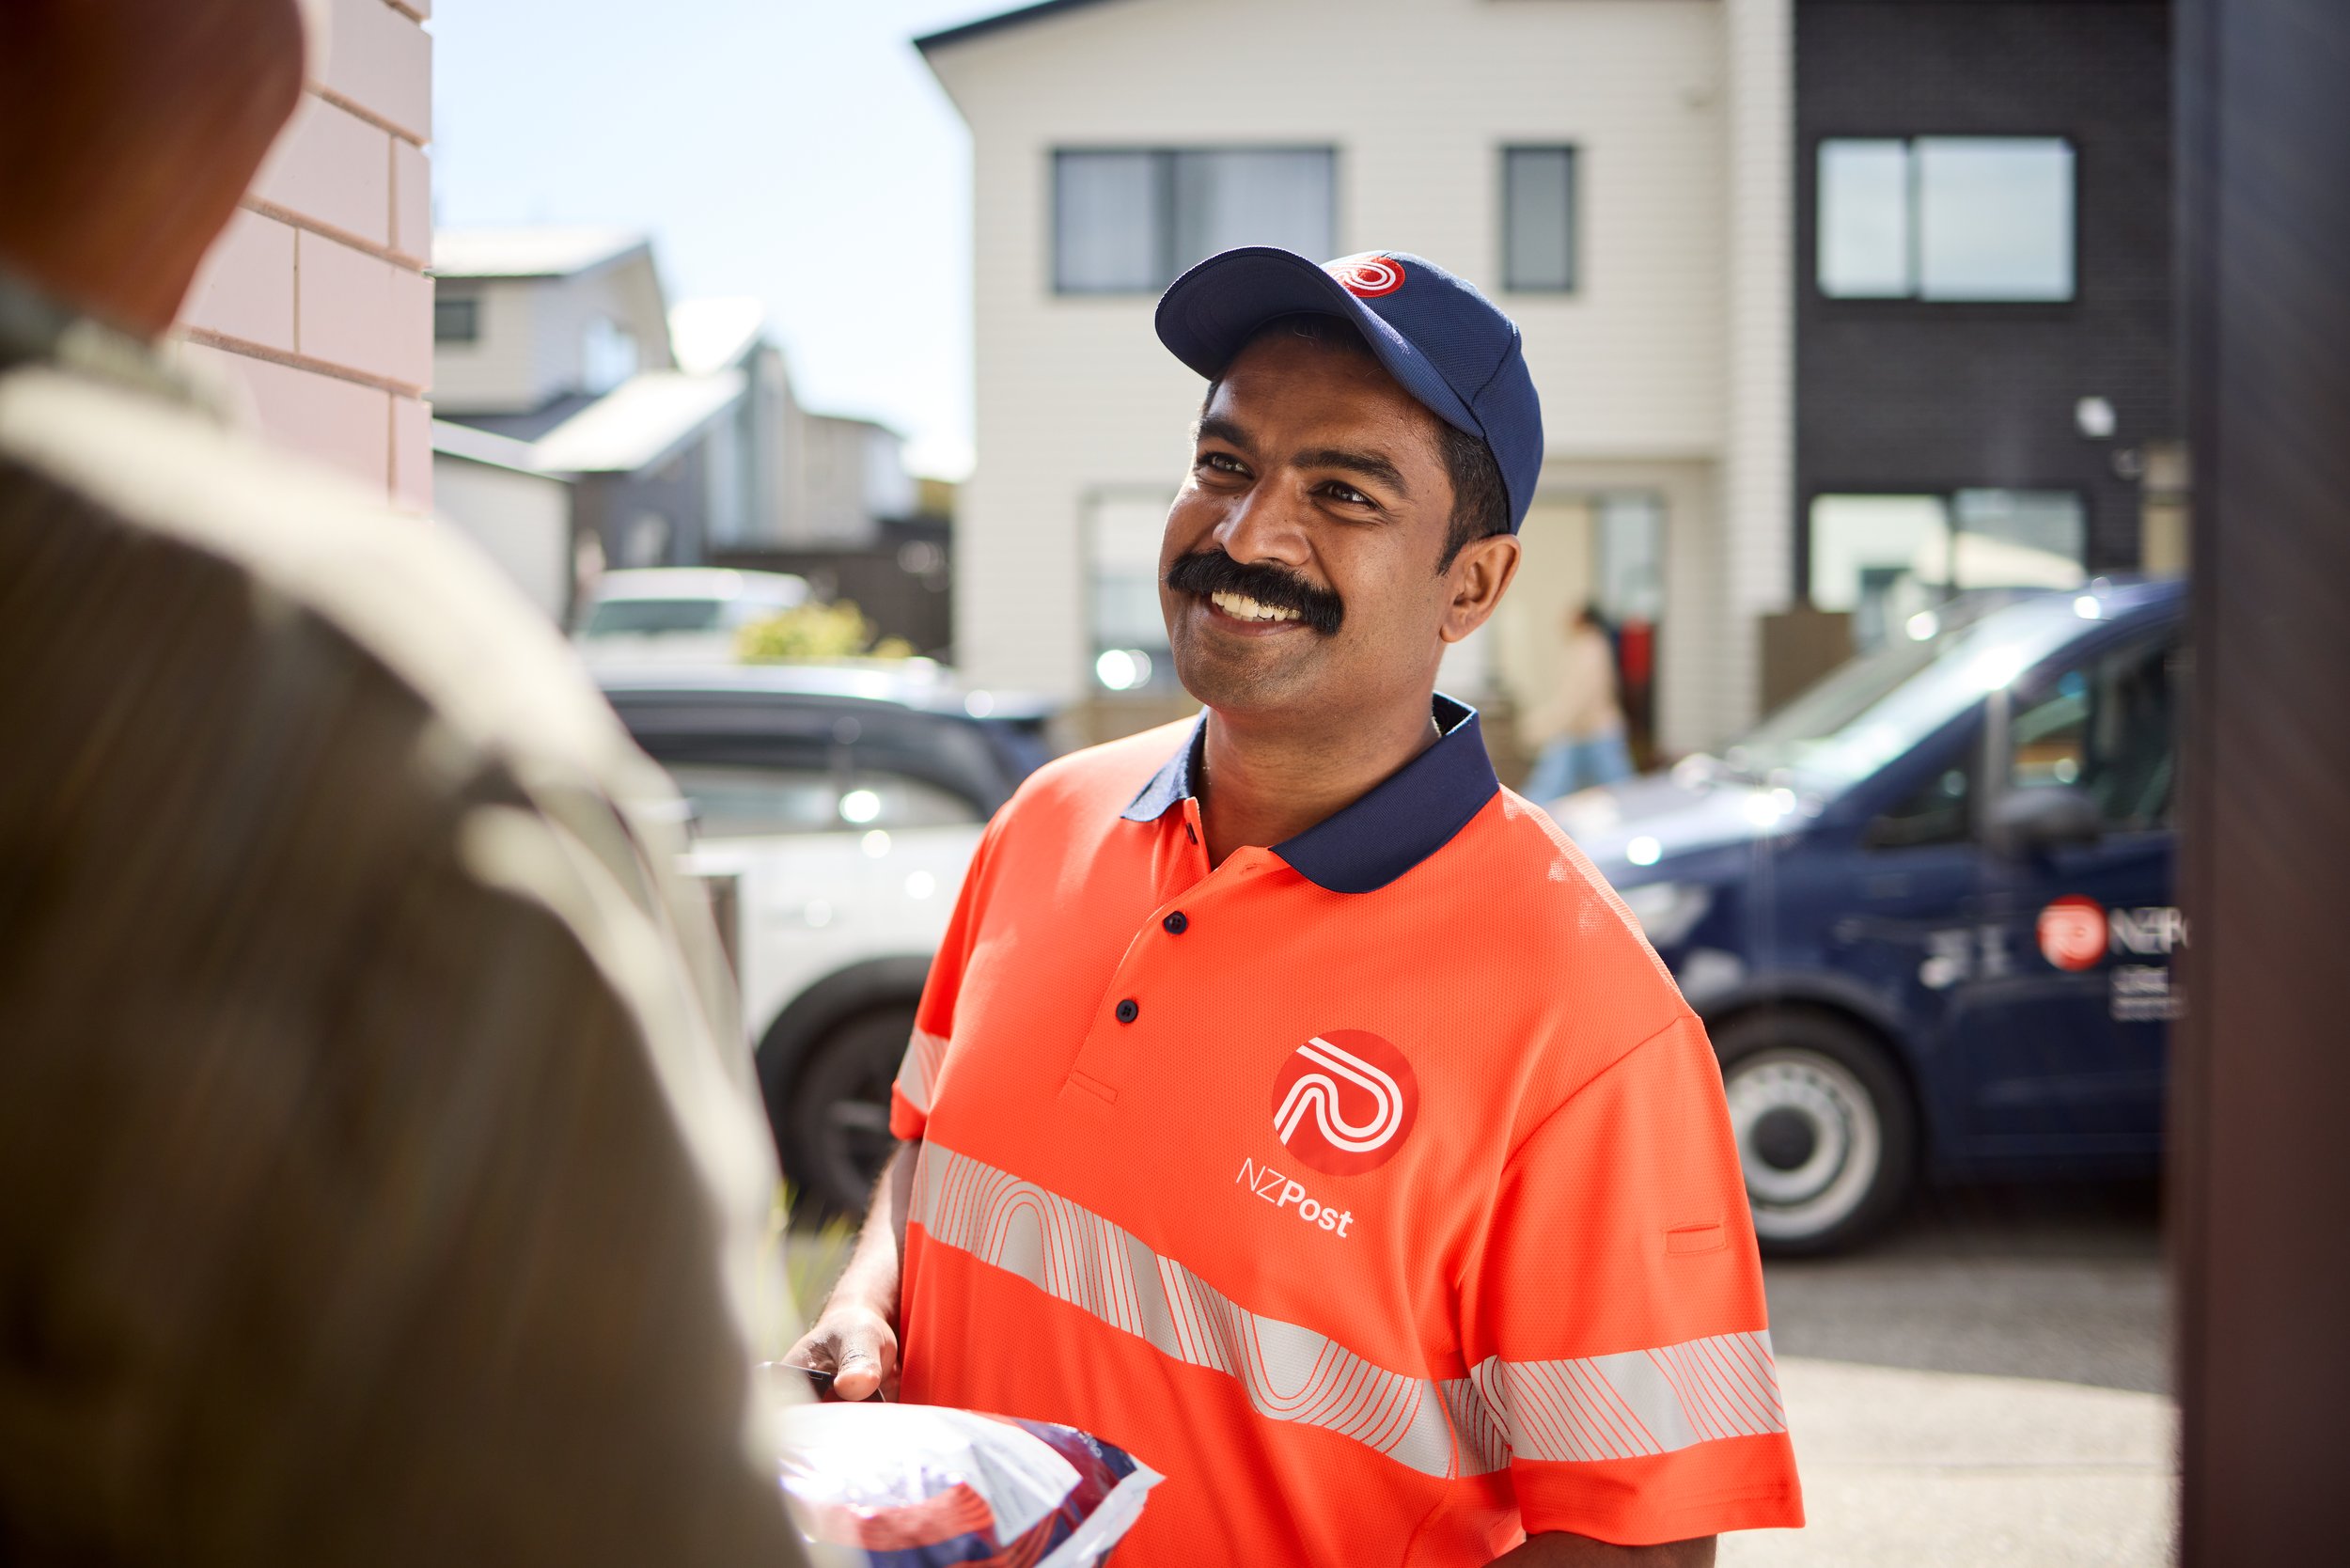 NZ Post - Consumer Delivery September 2022 (Final Selects)-63.jpg